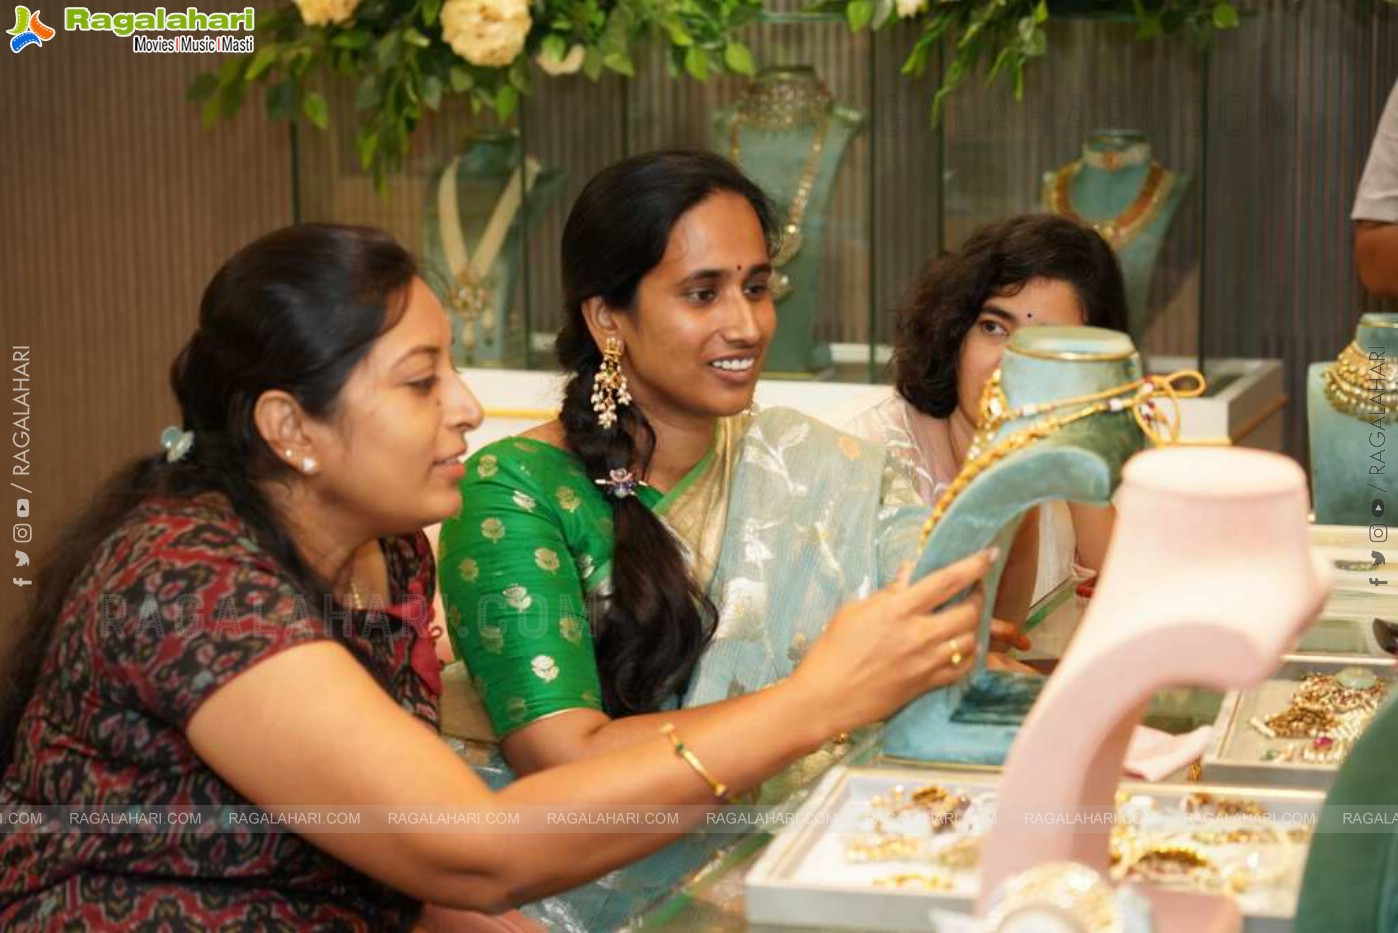 Meghana Jewellers Launch Flagship Store, Hyderabad